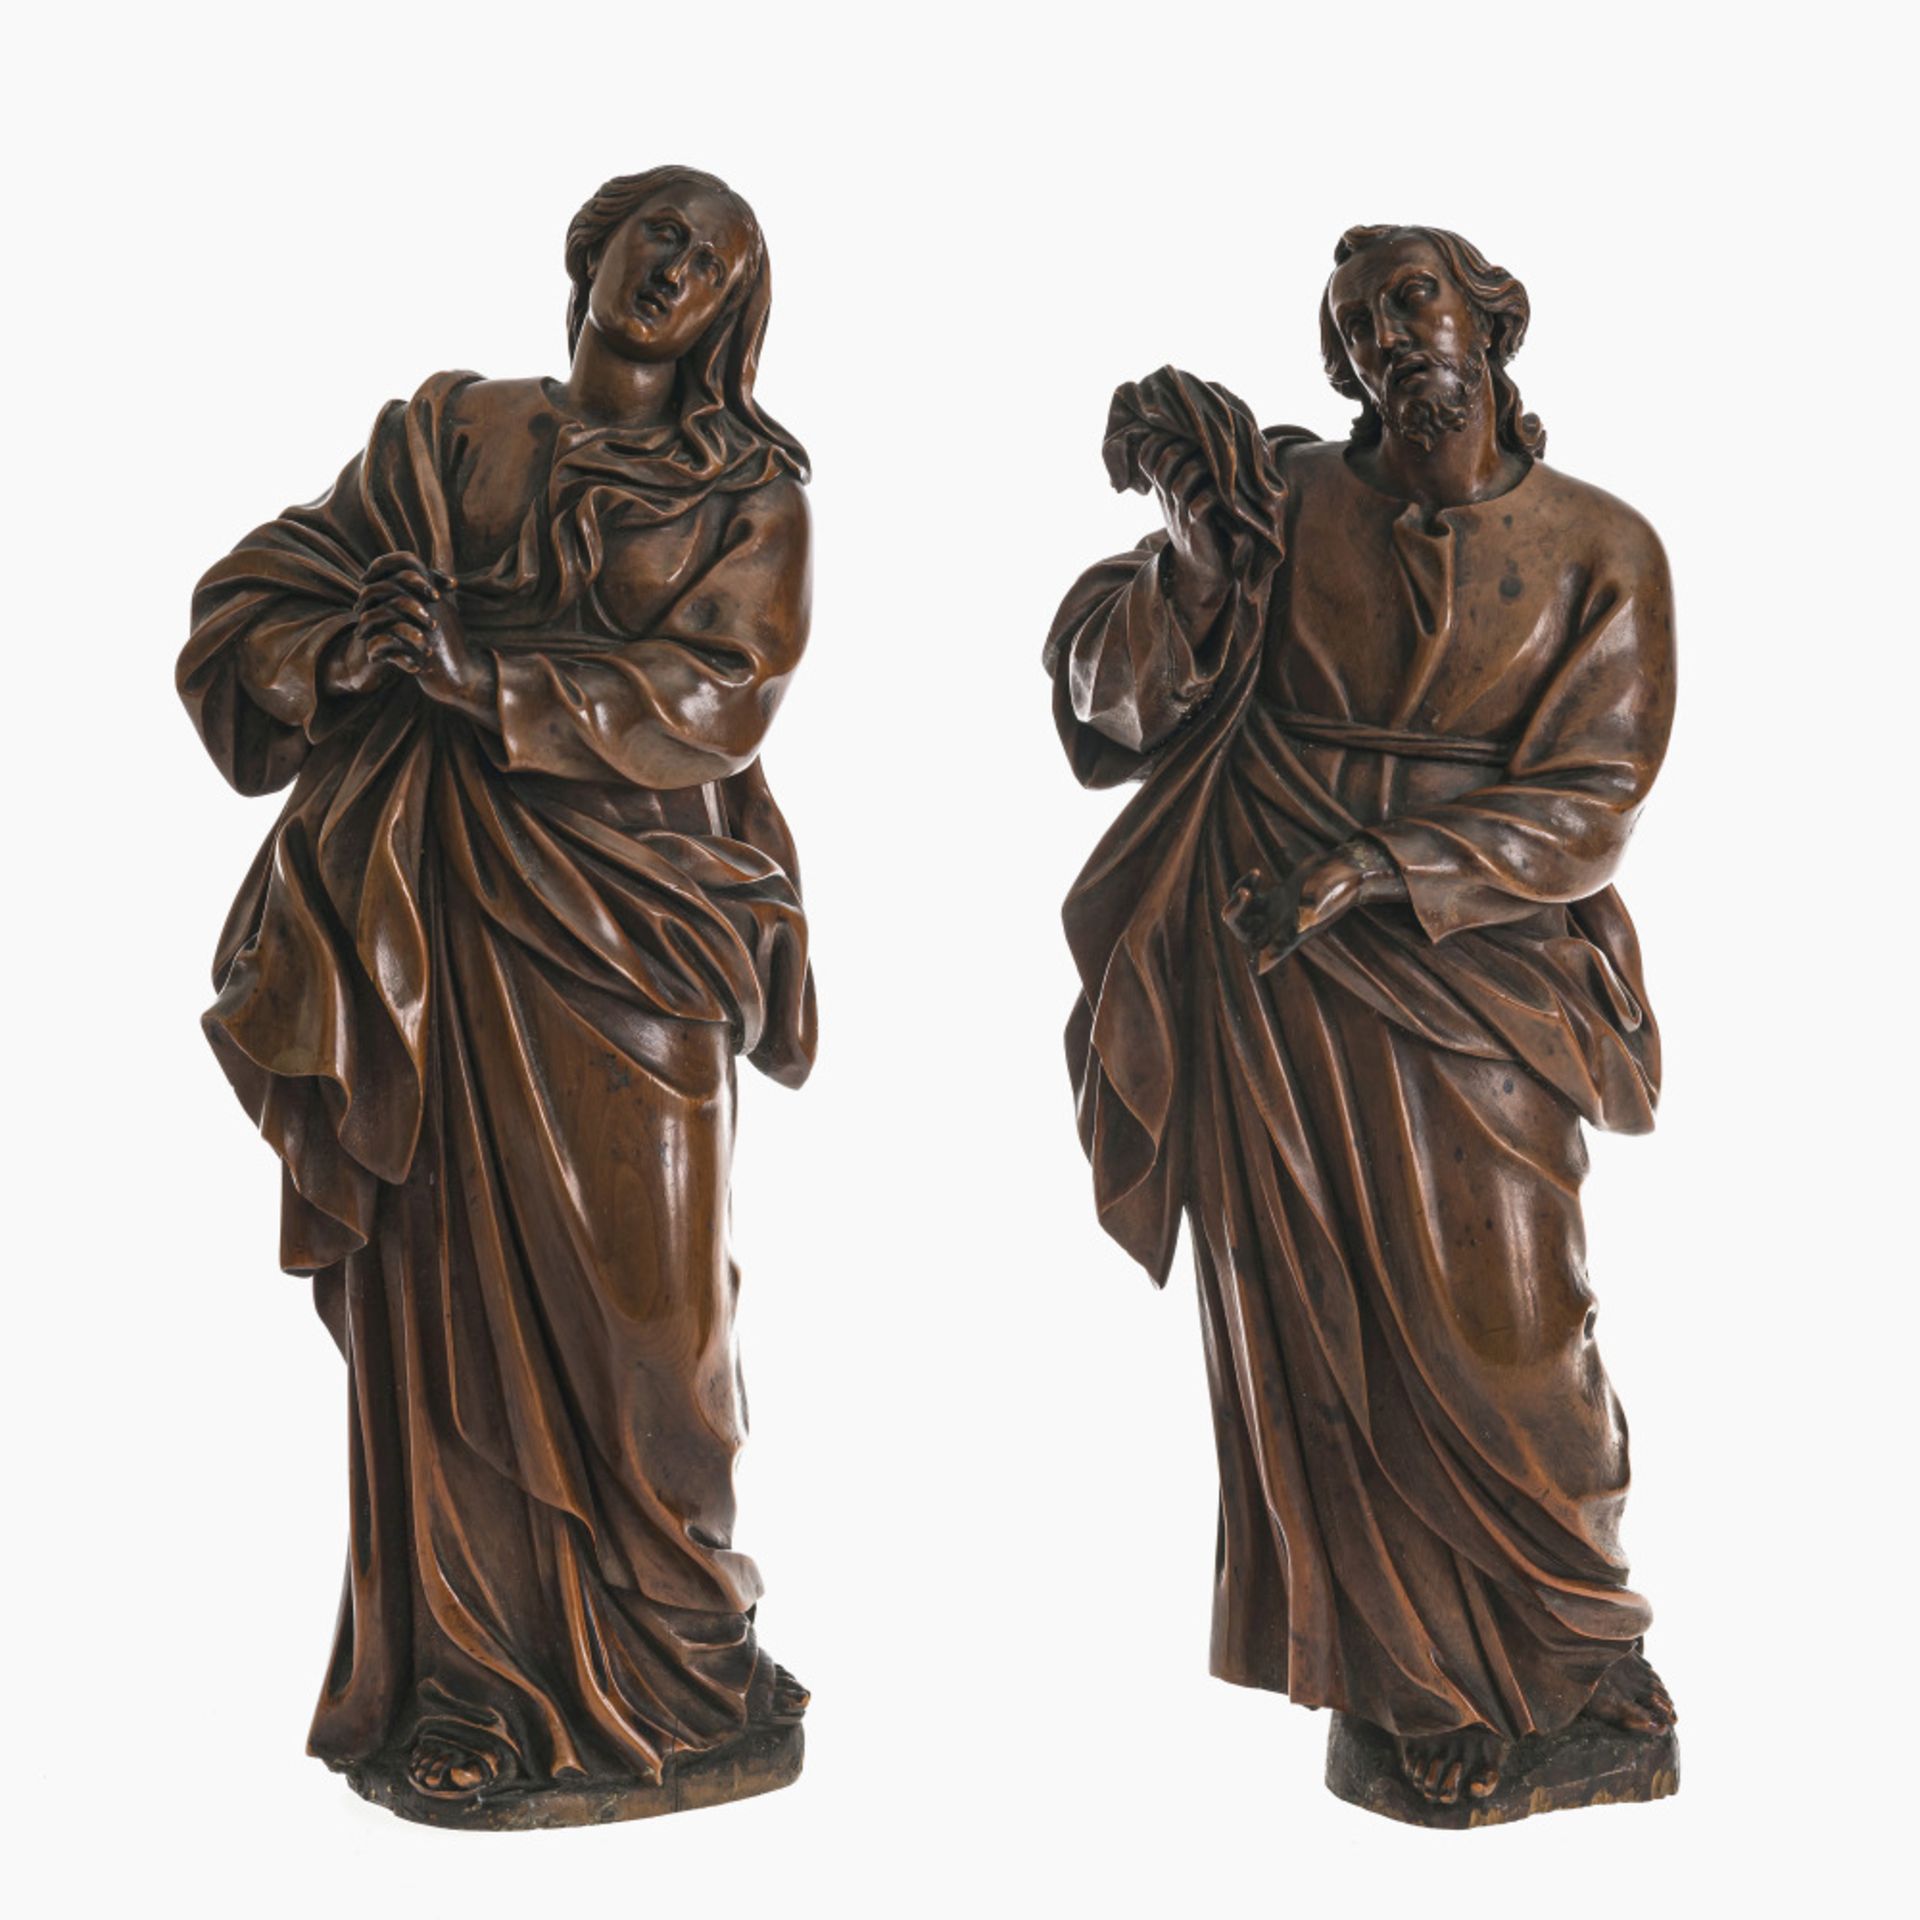 Mary and John - South German, probably late 18th century